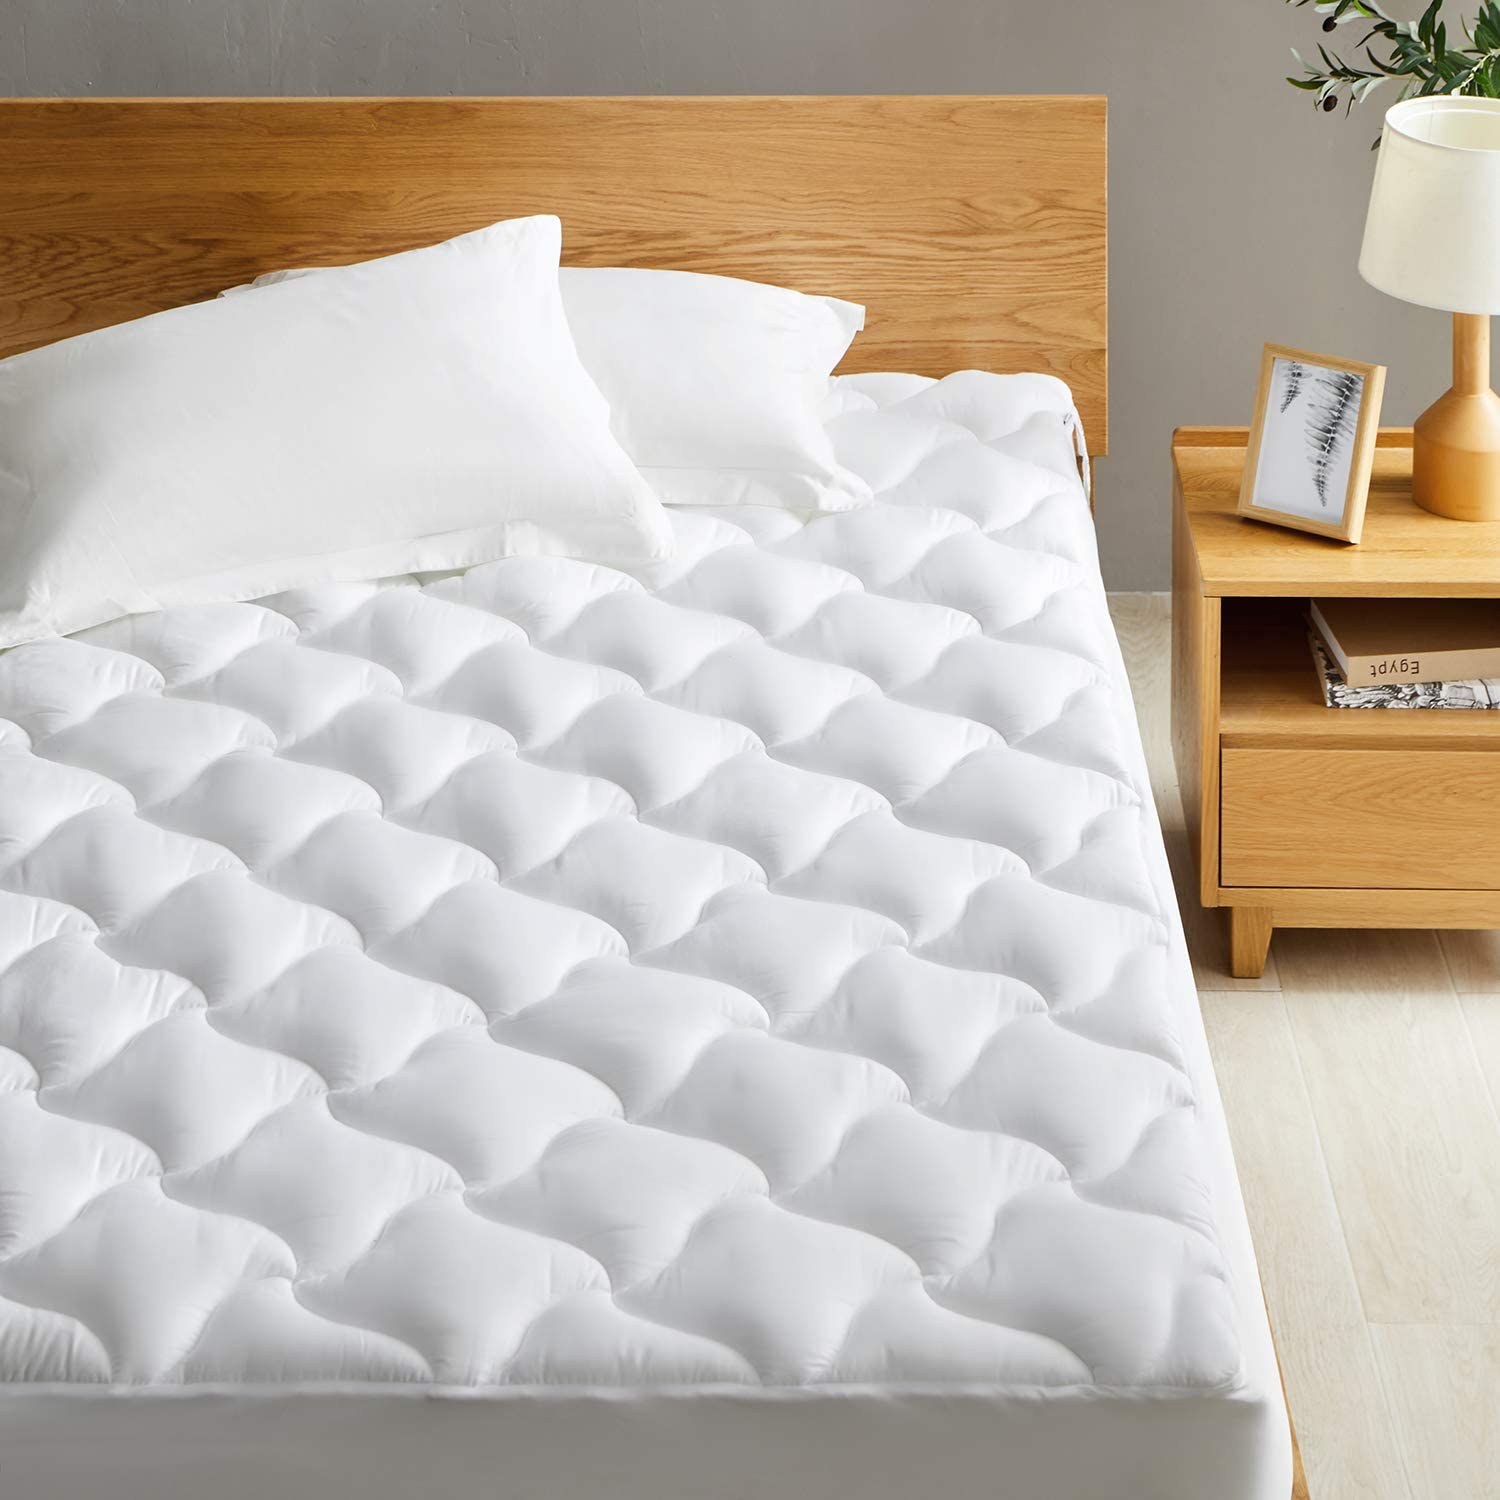 Western Home Cotton Queen Size Mattress Pad Cover, Thick Mattress ...